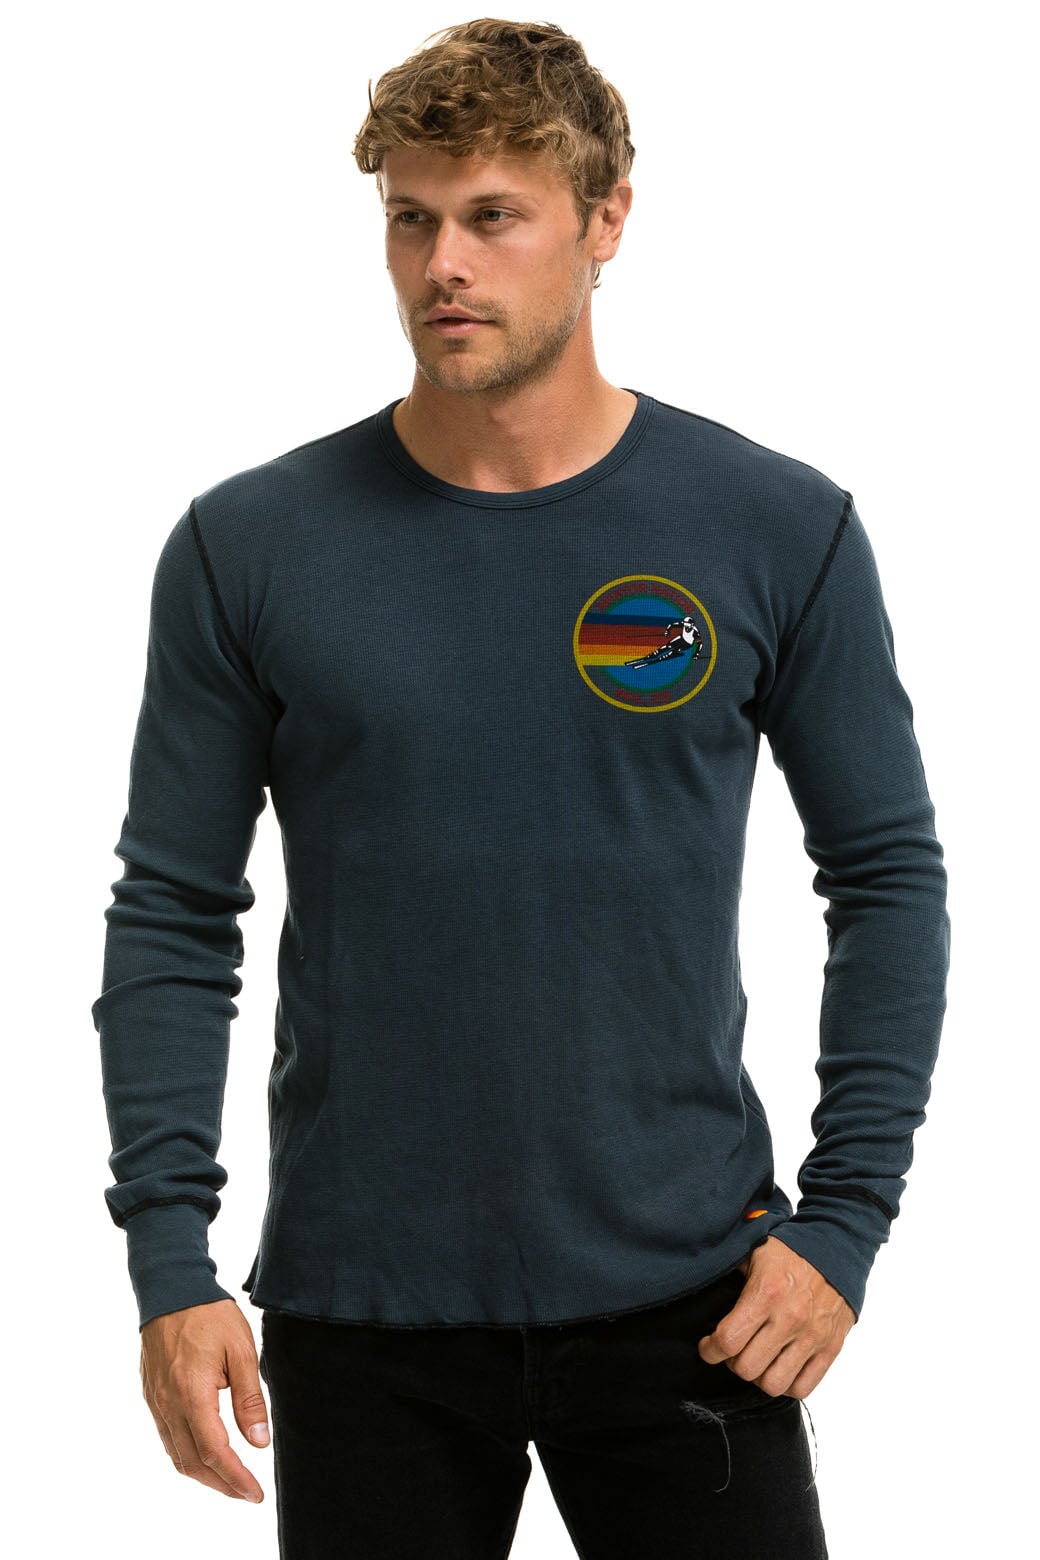 AVIATOR NATION VAIL THERMAL - CHARCOAL Thermal Aviator Nation 